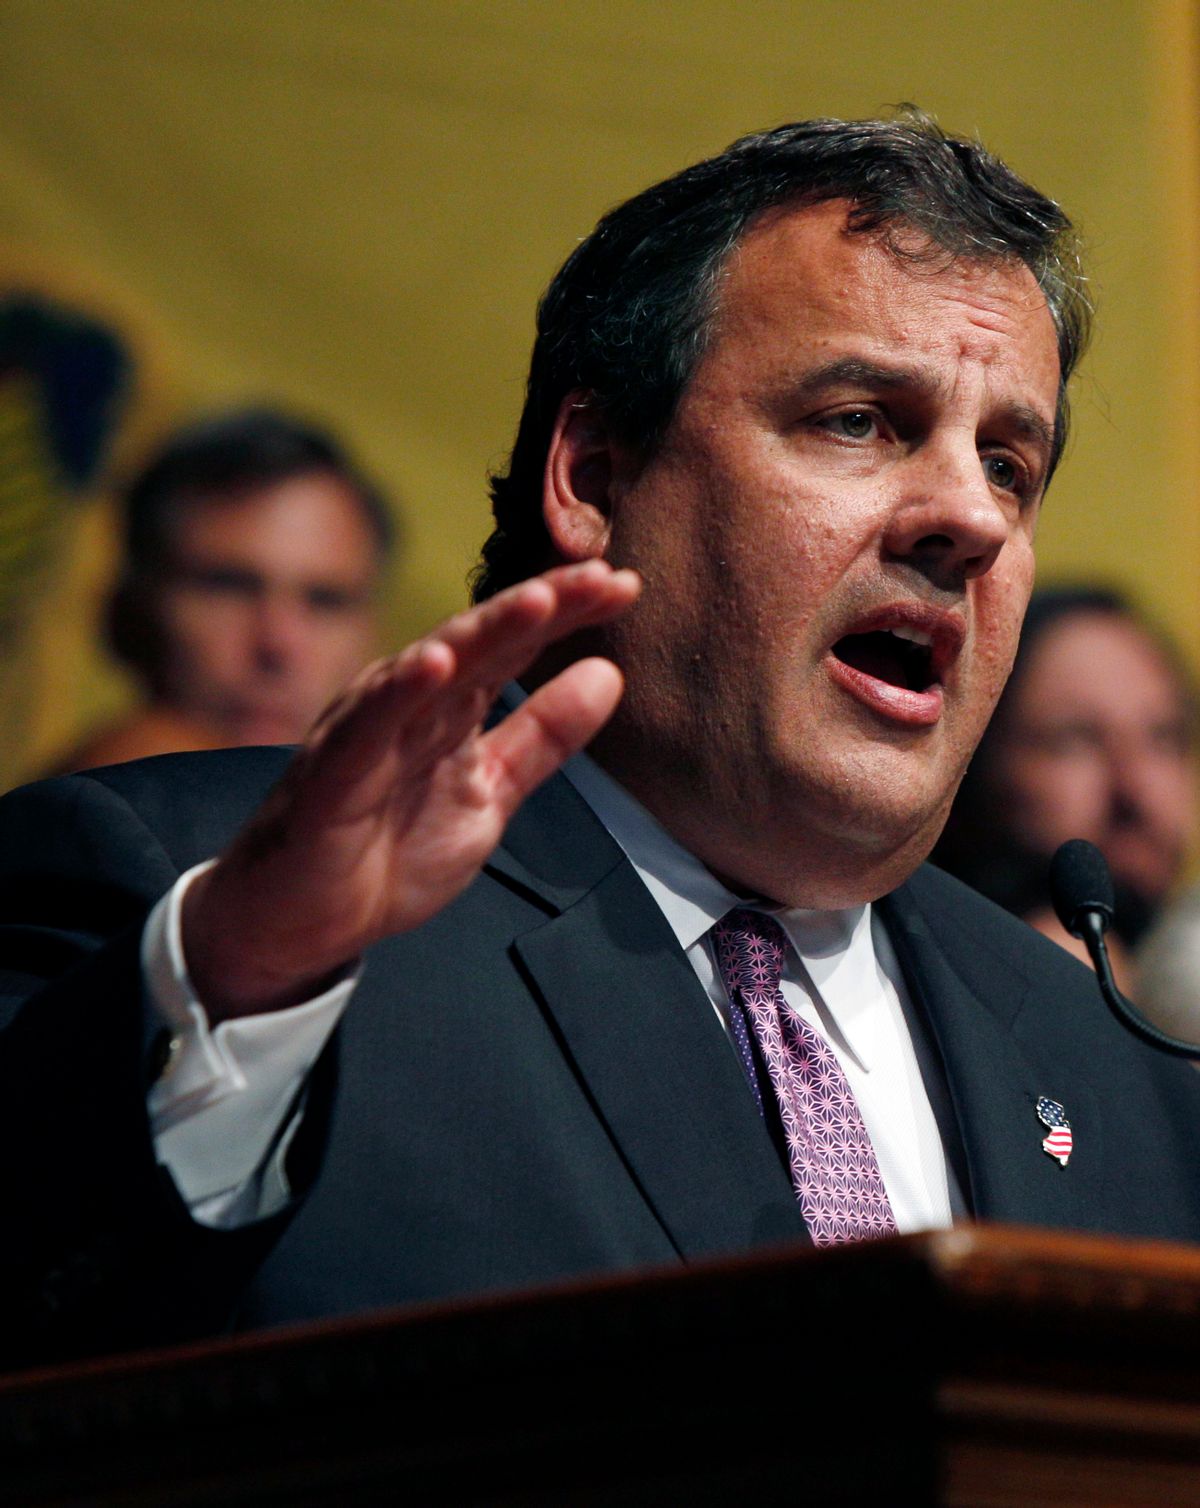 New Jersey Gov. Chris Christie answers a question after signing employee benefits legislation into law Tuesday, June  28, 2011, in Trenton, N.J. Christie says his biggest accomplishment so far was getting the employee benefits legislation through the Democratic-controlled Legislature.  (AP Photo/Mel Evans) (Mel Evans)